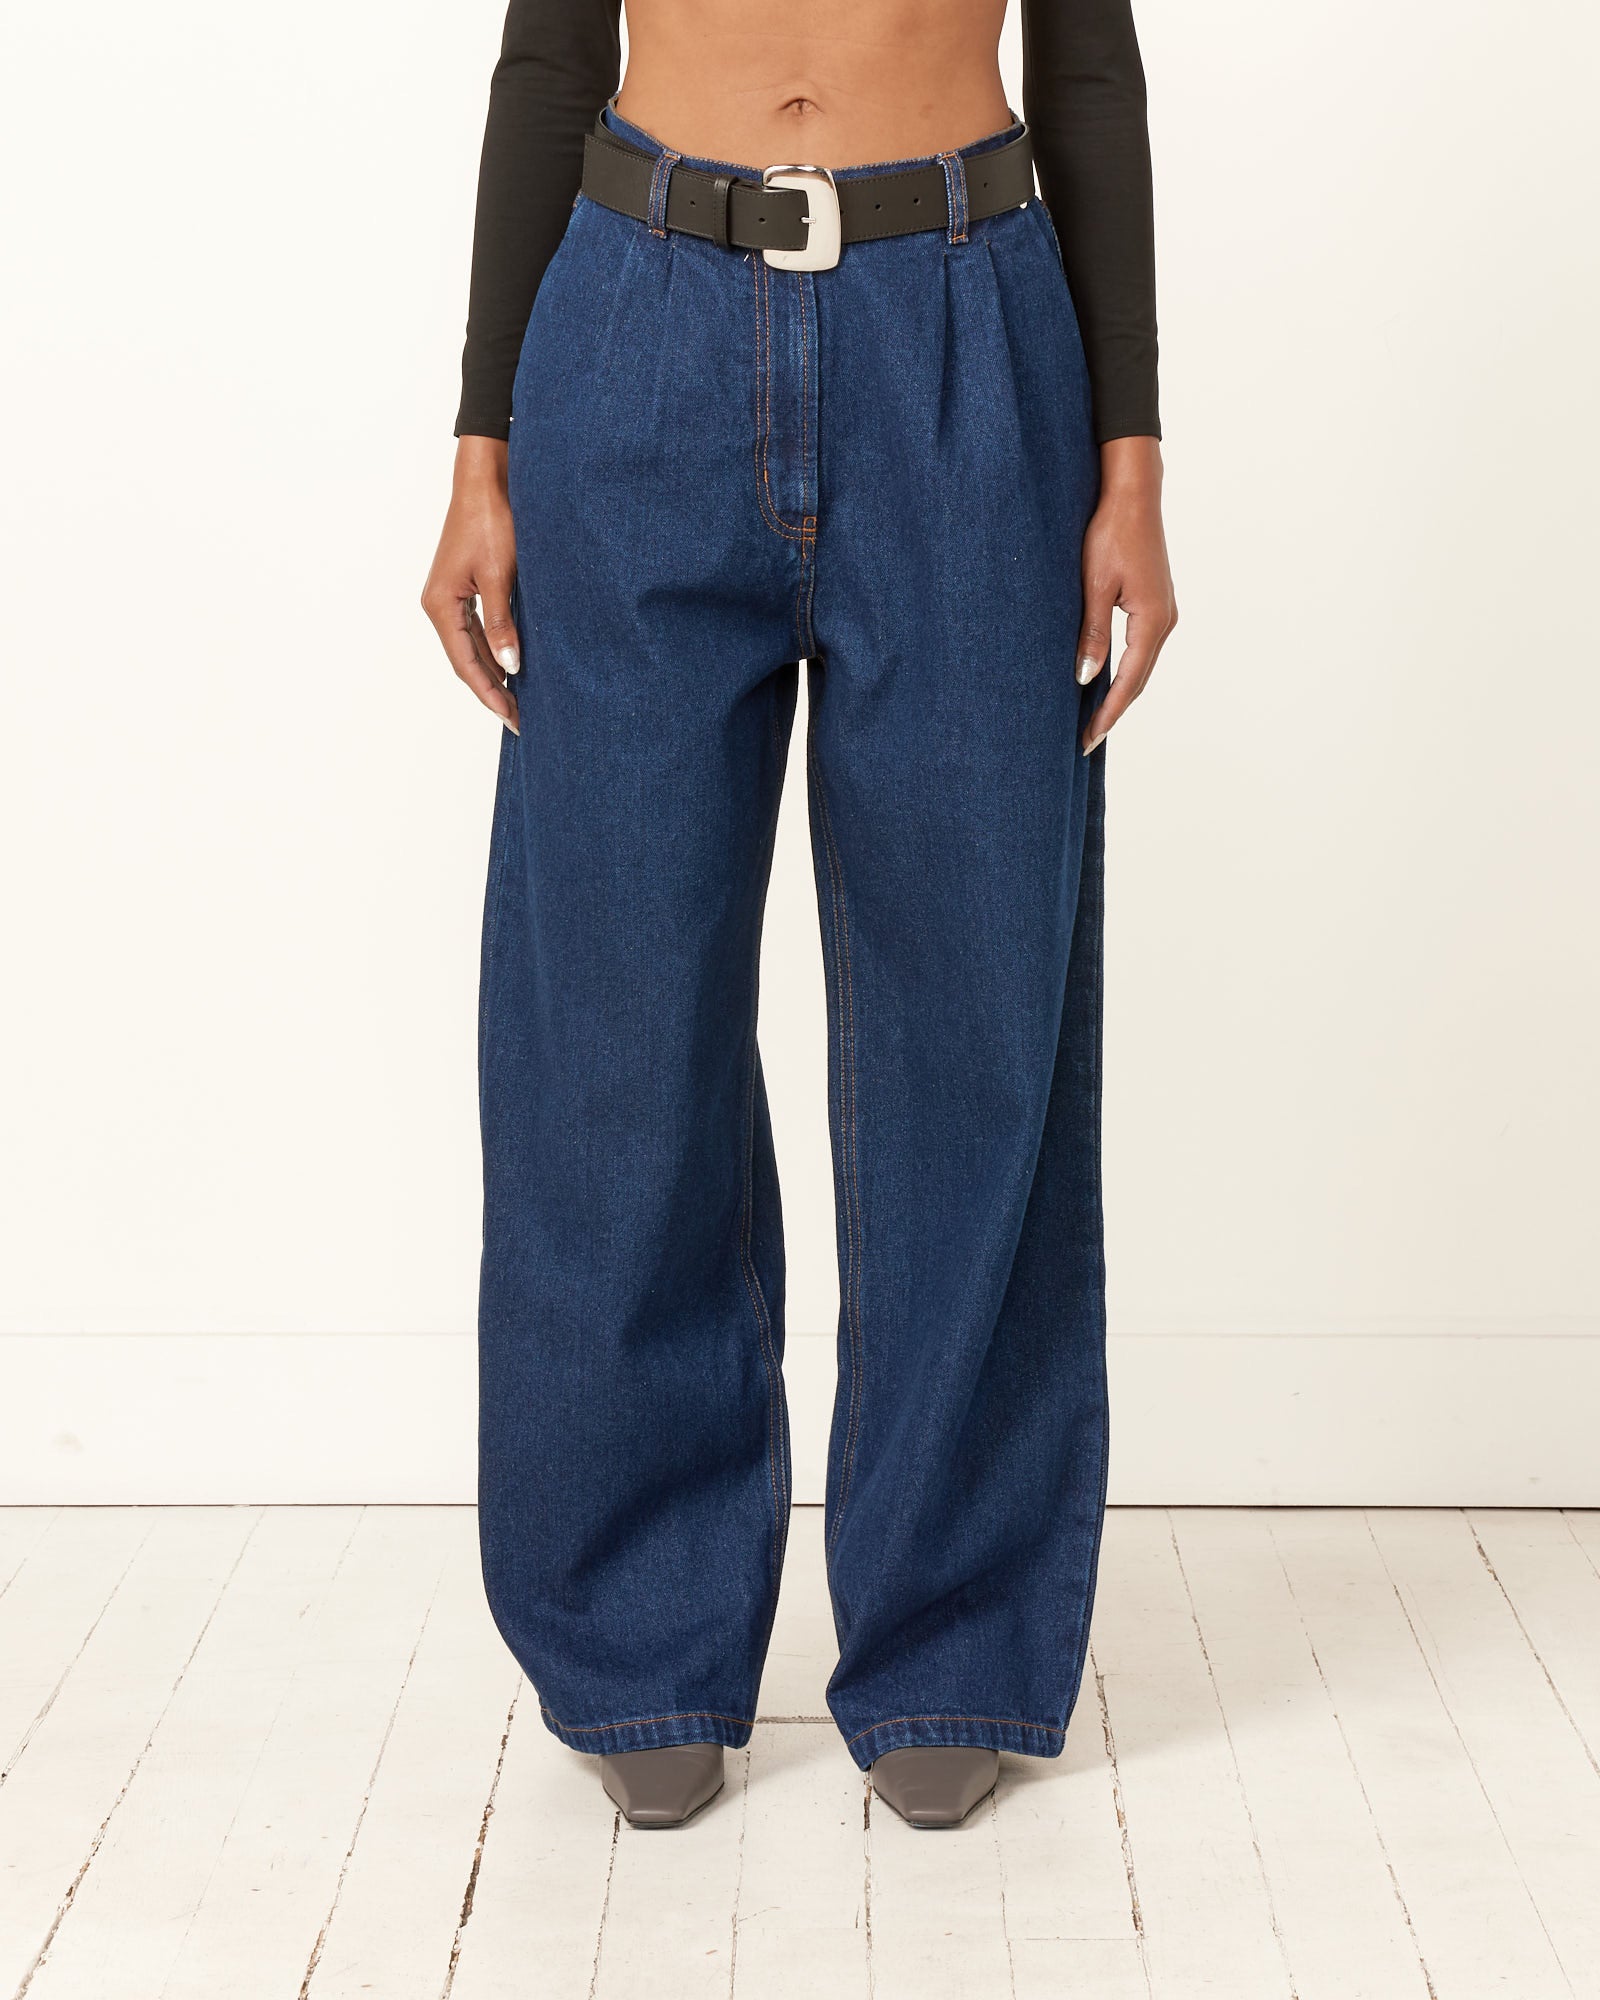 Haring Trouser in Blue Wash